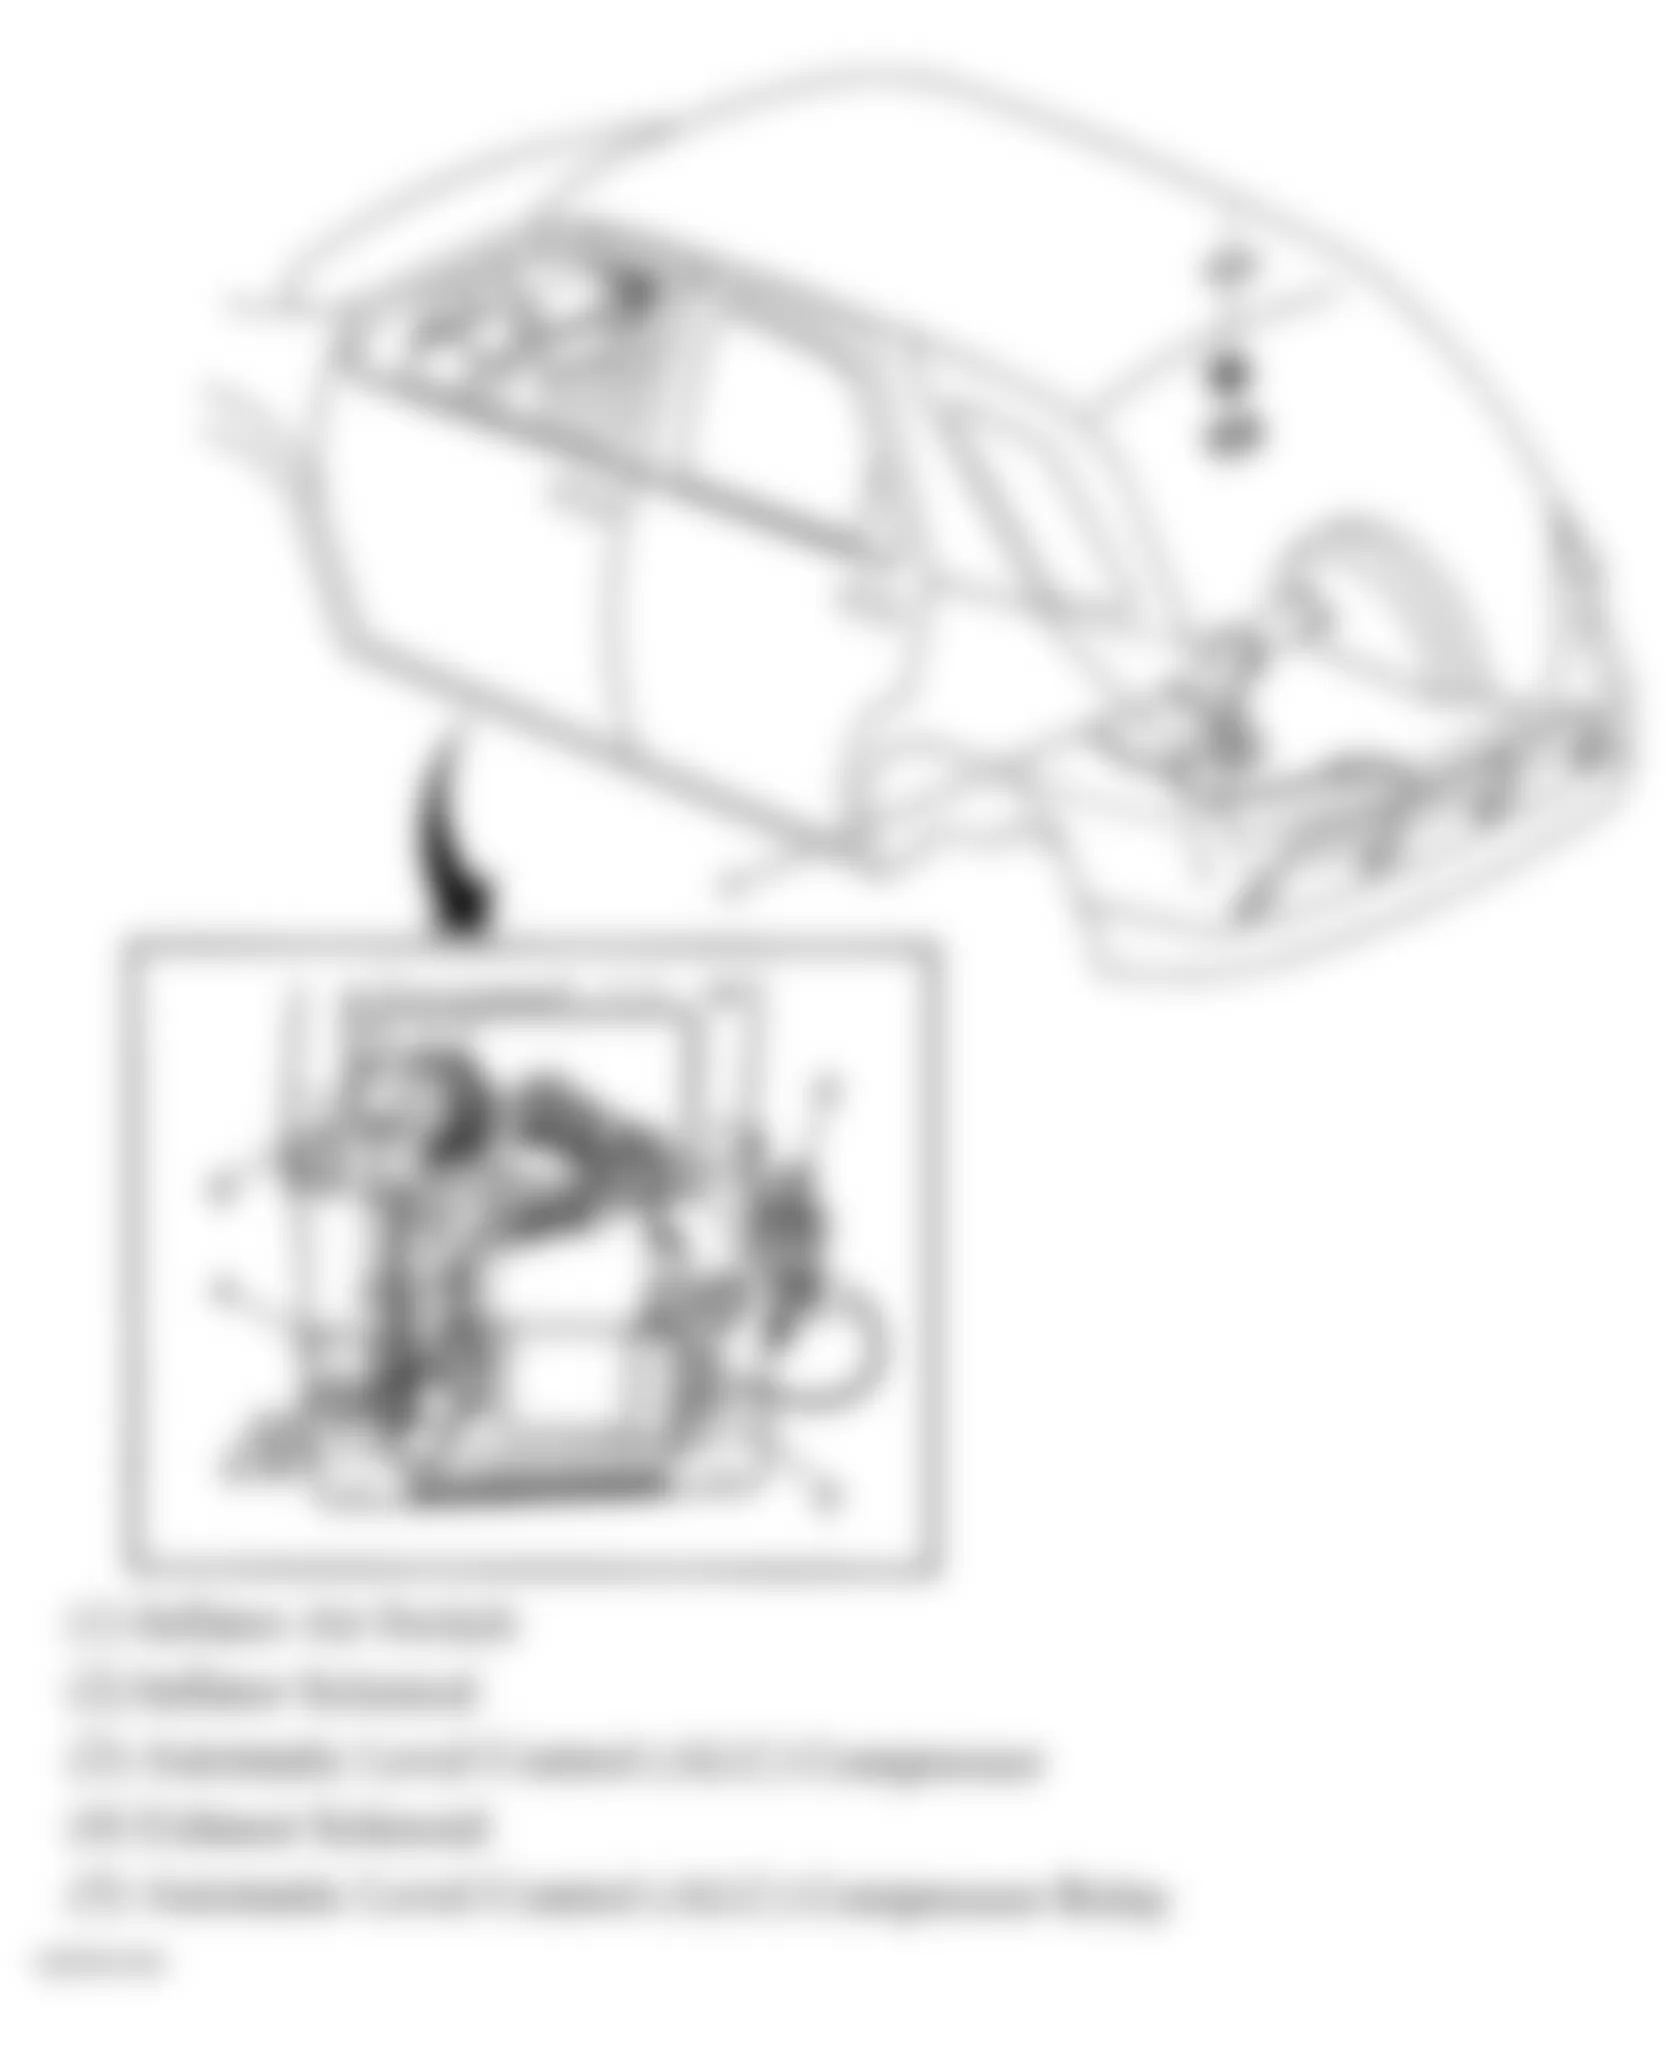 Buick Rendezvous Ultra 2004 - Component Locations -  Rear Of Vehicle